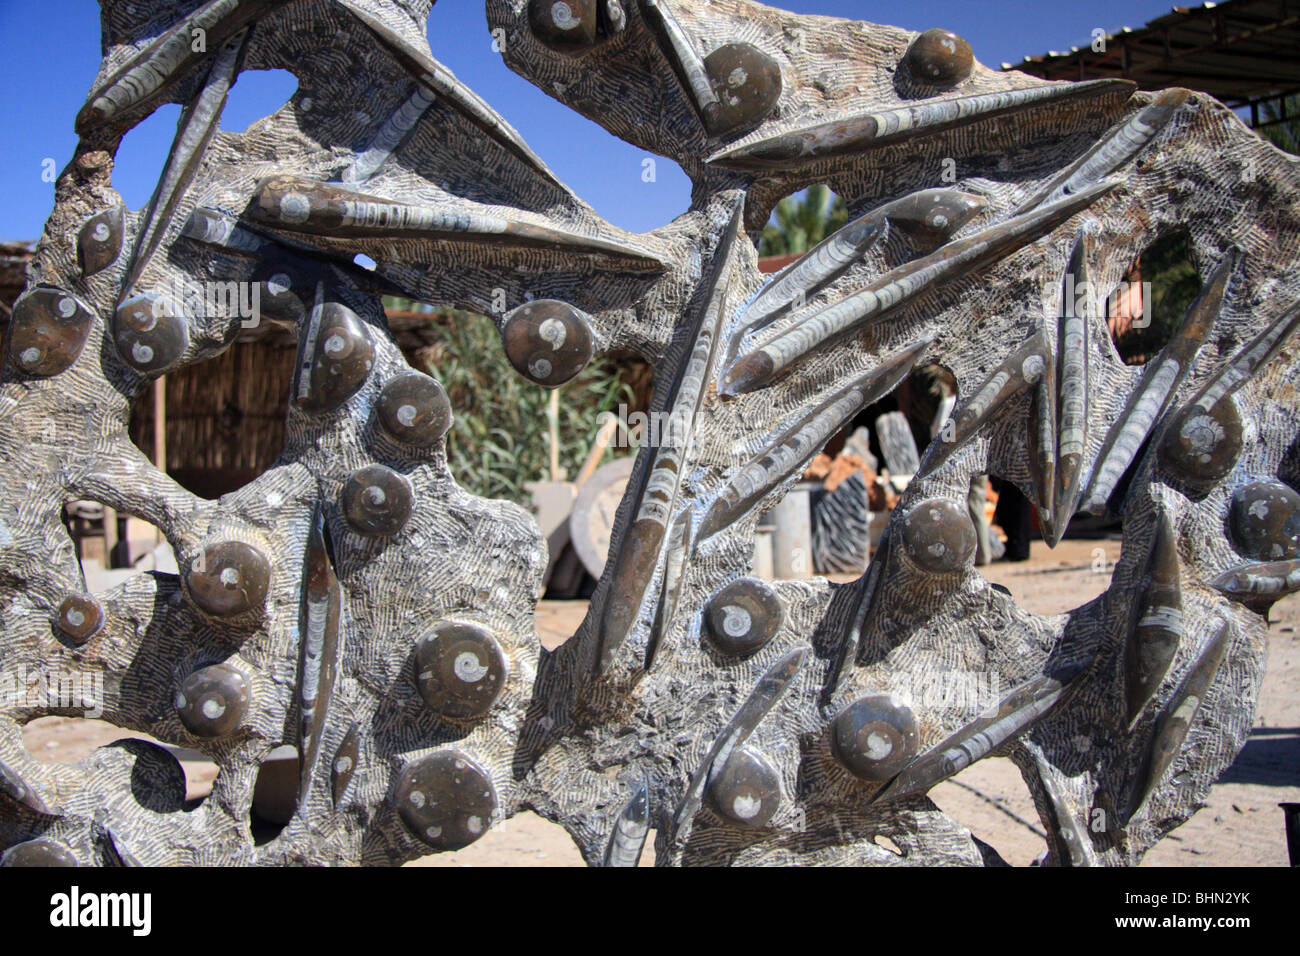 Detail of fossils including belemnites in rock st a fossil processing factory in Morocco, North Africa Stock Photo